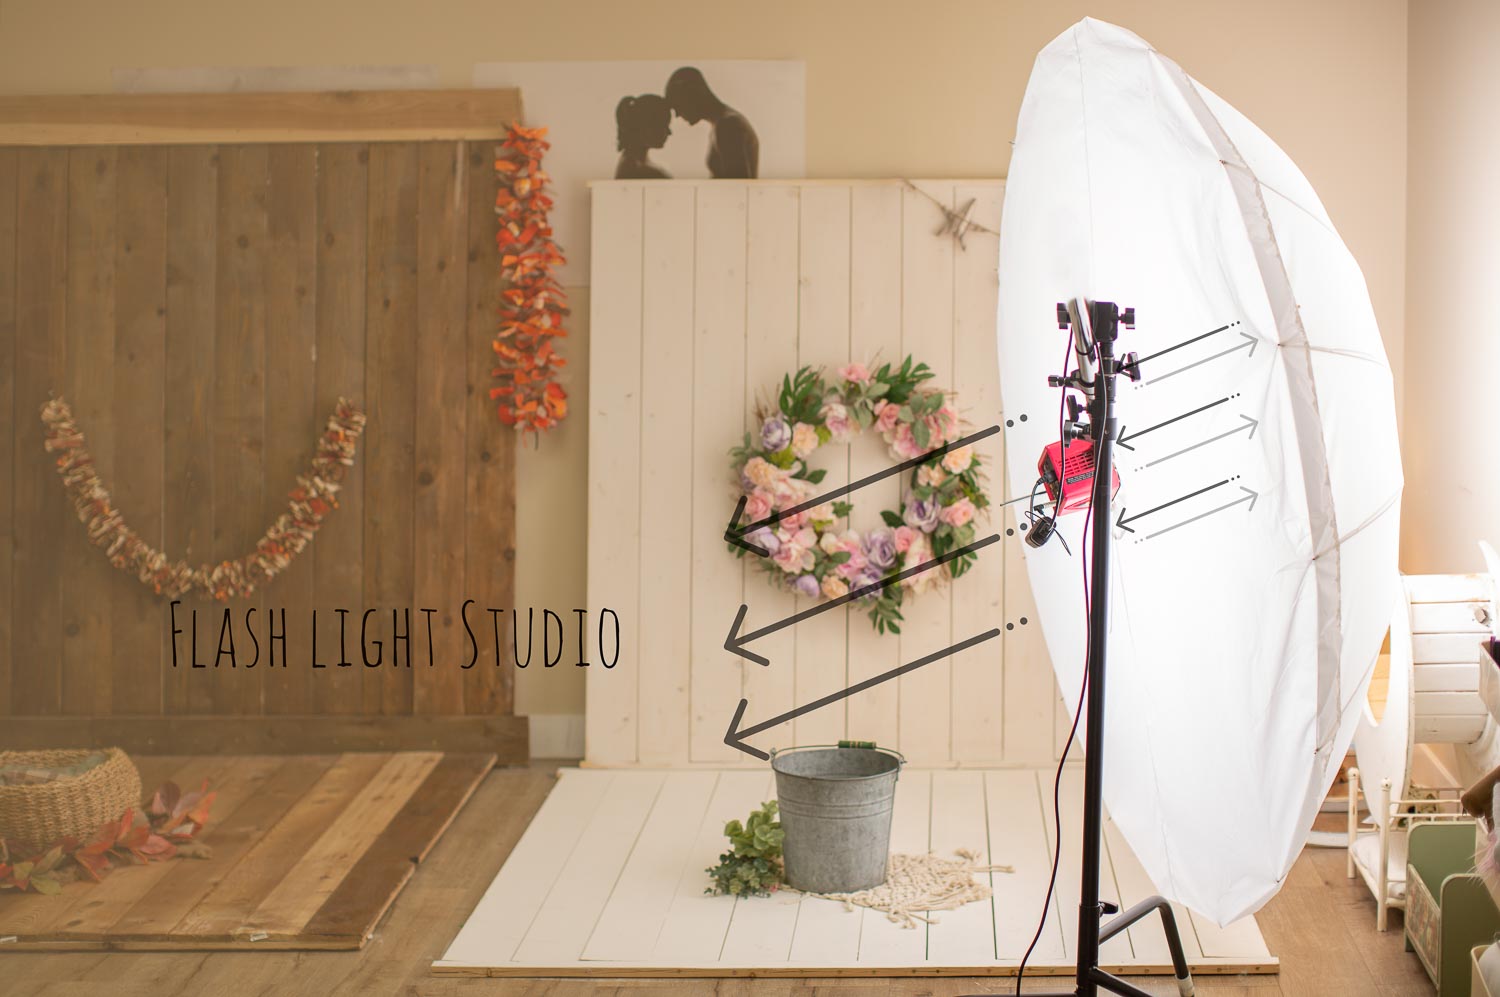 Is studio flashlight photography safe for babies and newborns?